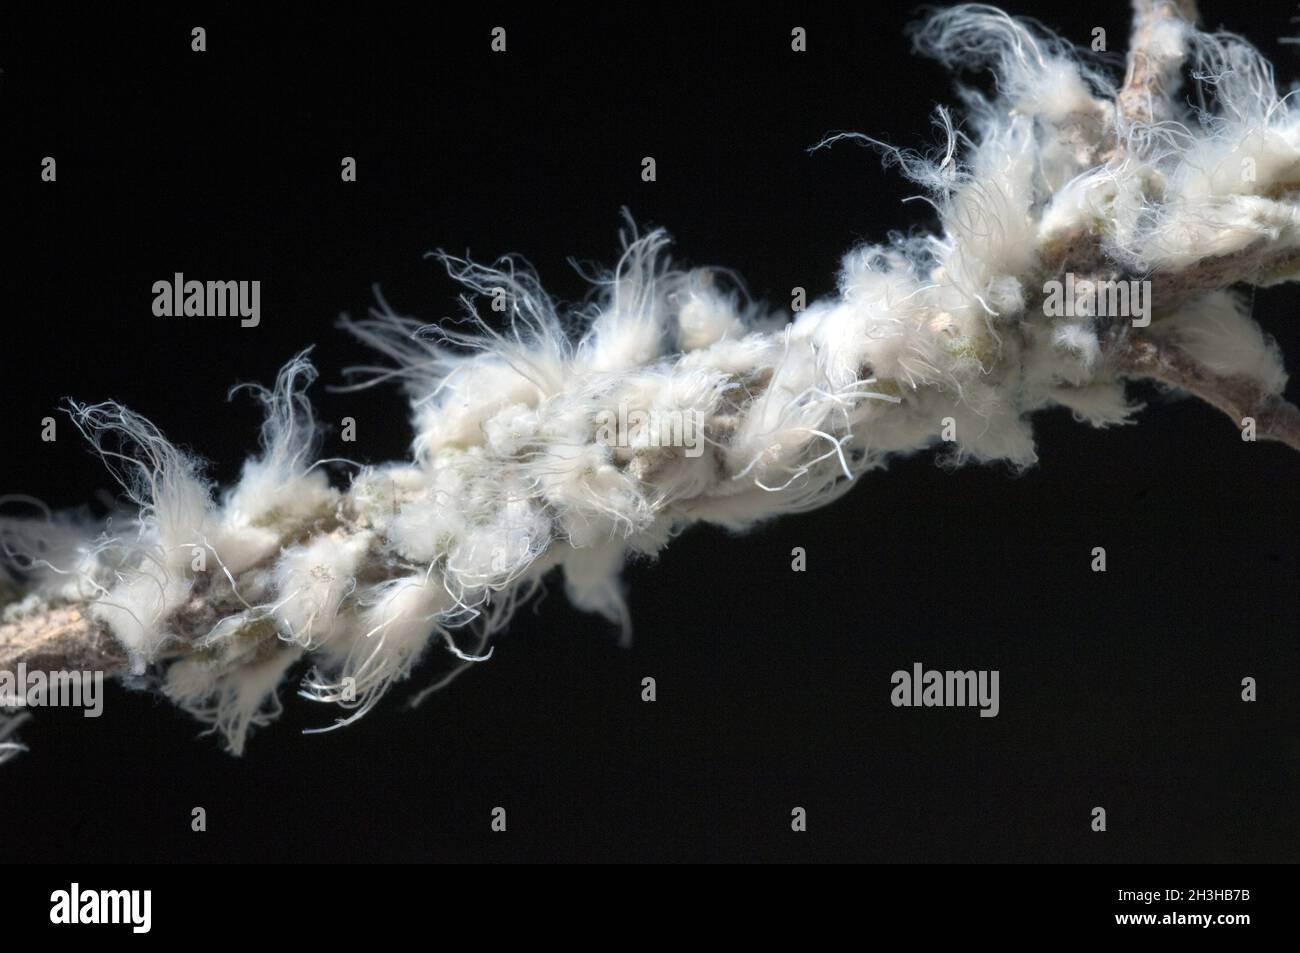 Lice, mealy bugs, Stock Photo